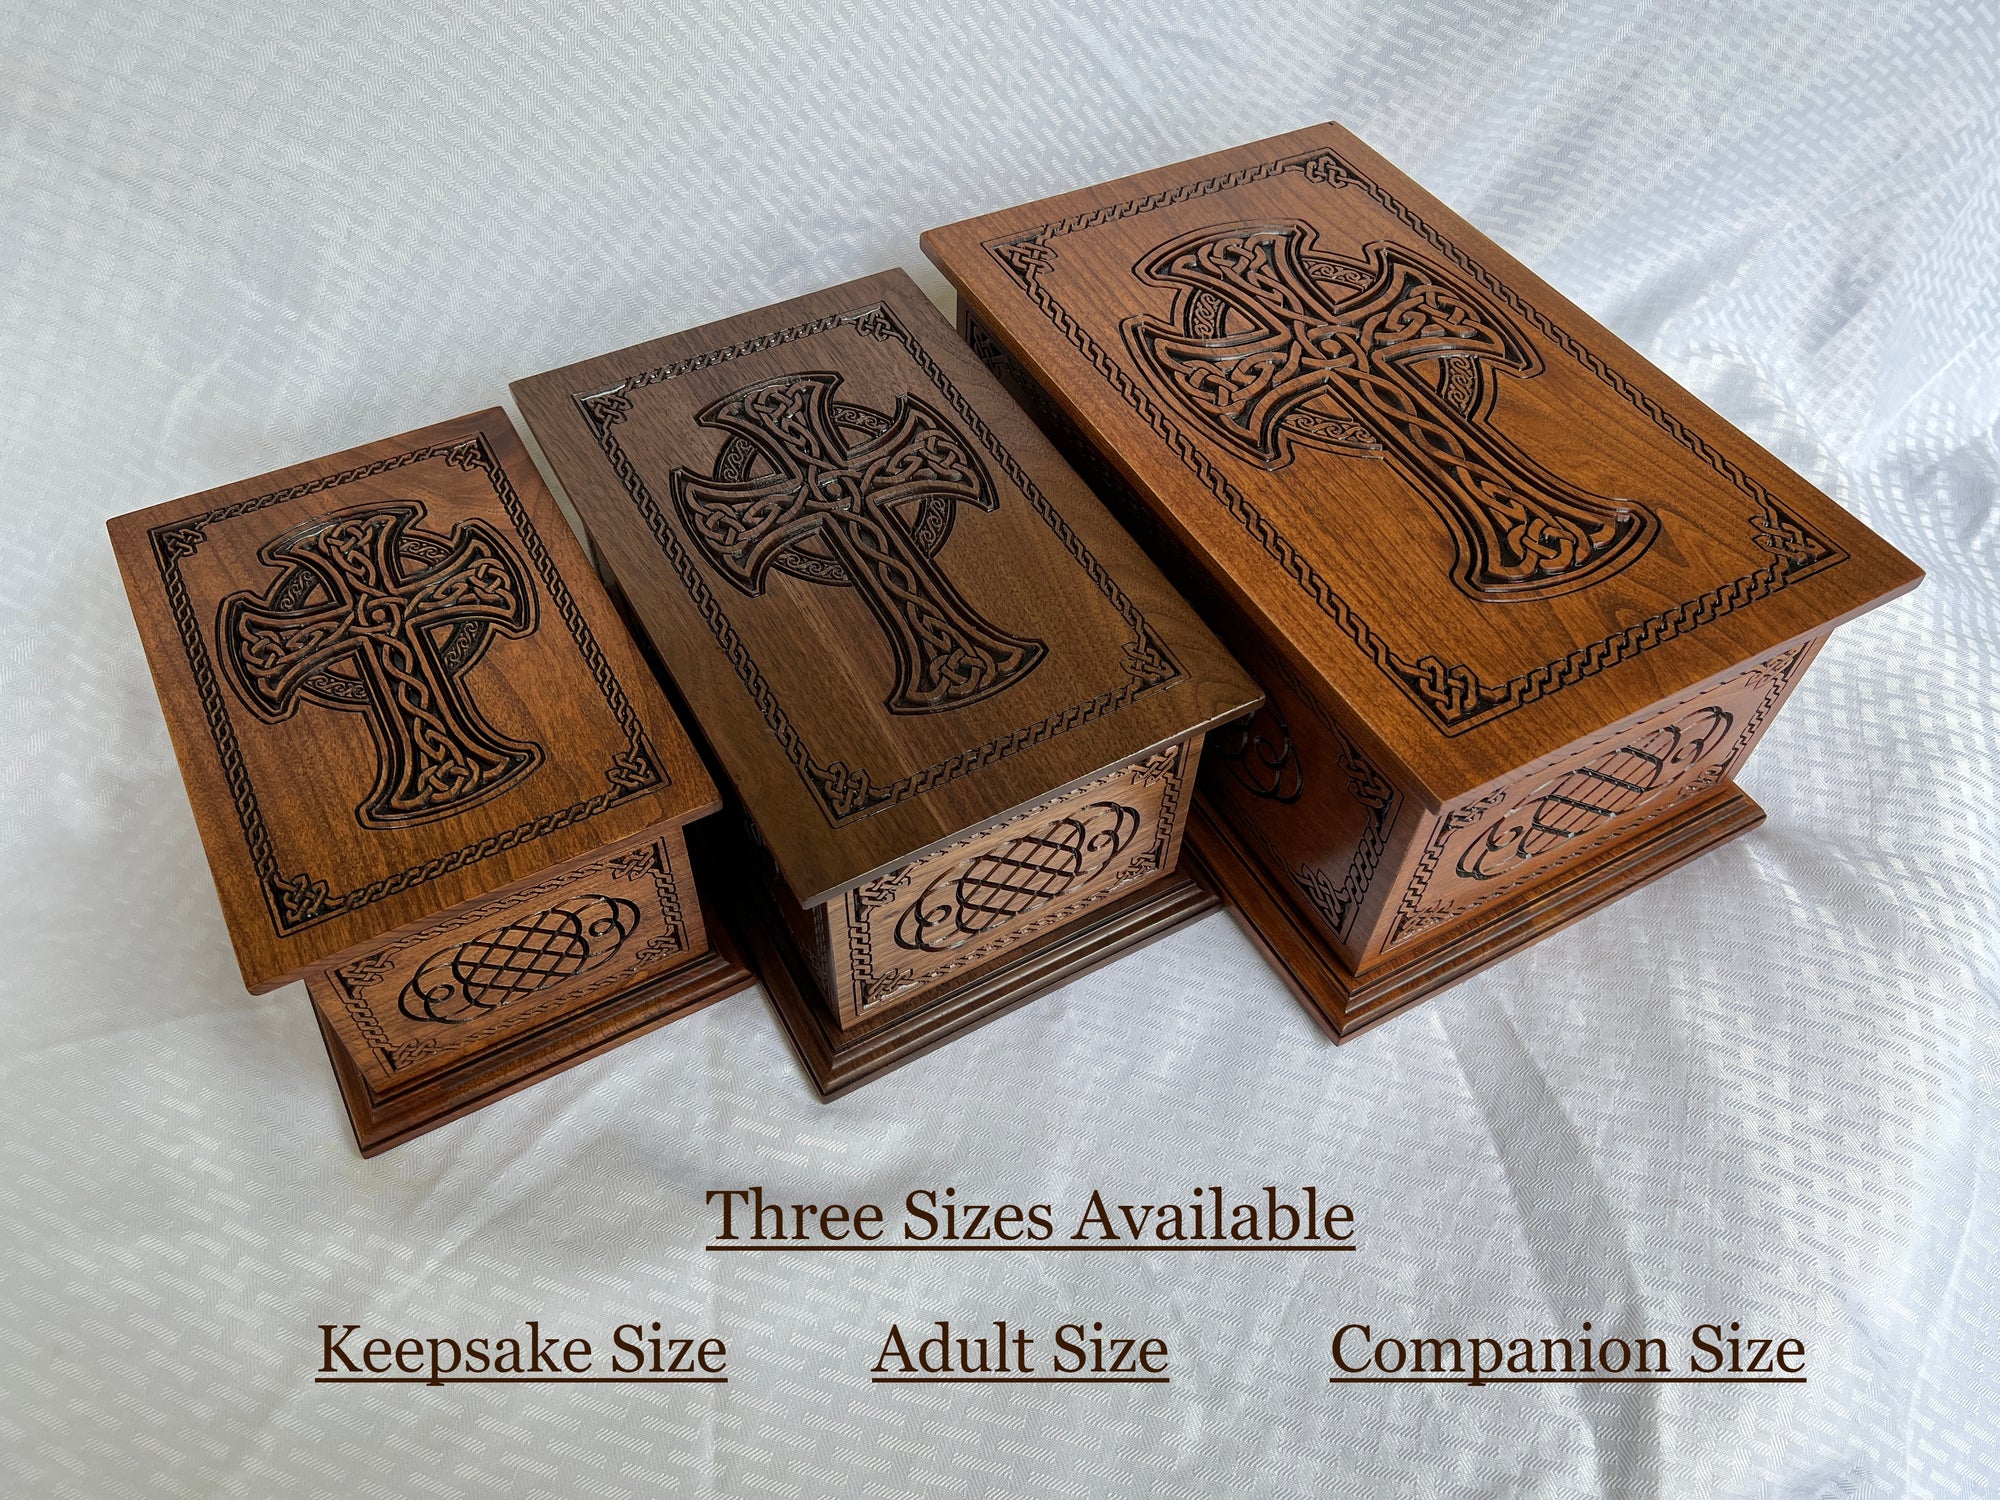 Image shows the approximate difference in the three available sizes offered in the Celtic Cross and Weave Urn between the keepsake size (intended for a portion of an average adult's cremated ashes), adult size, and companion size (designed for two adult humans cremation ashes)